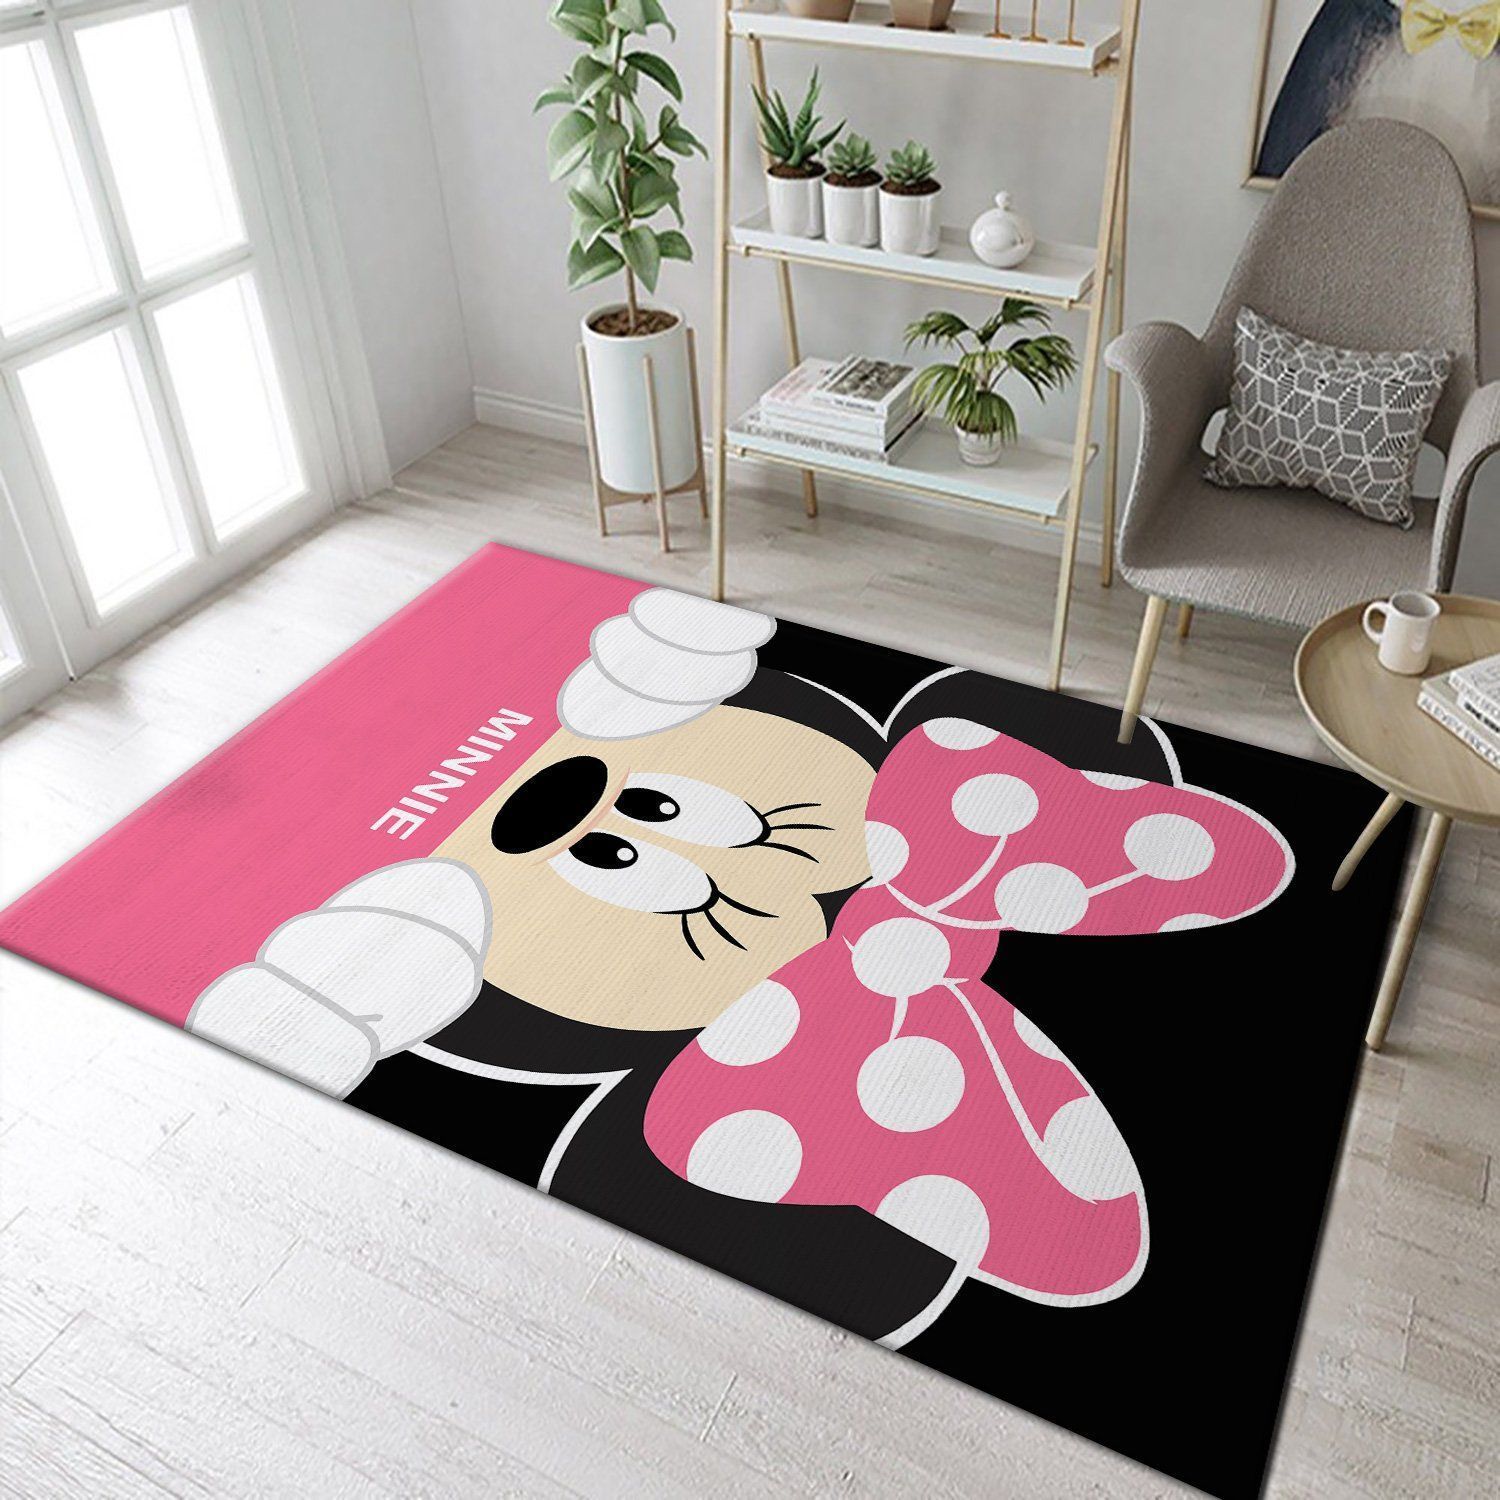 Minnie Mouse Area Rugs Disney Movies Living Room Carpet Local Brands Floor Decor The US Decor - Indoor Outdoor Rugs 2